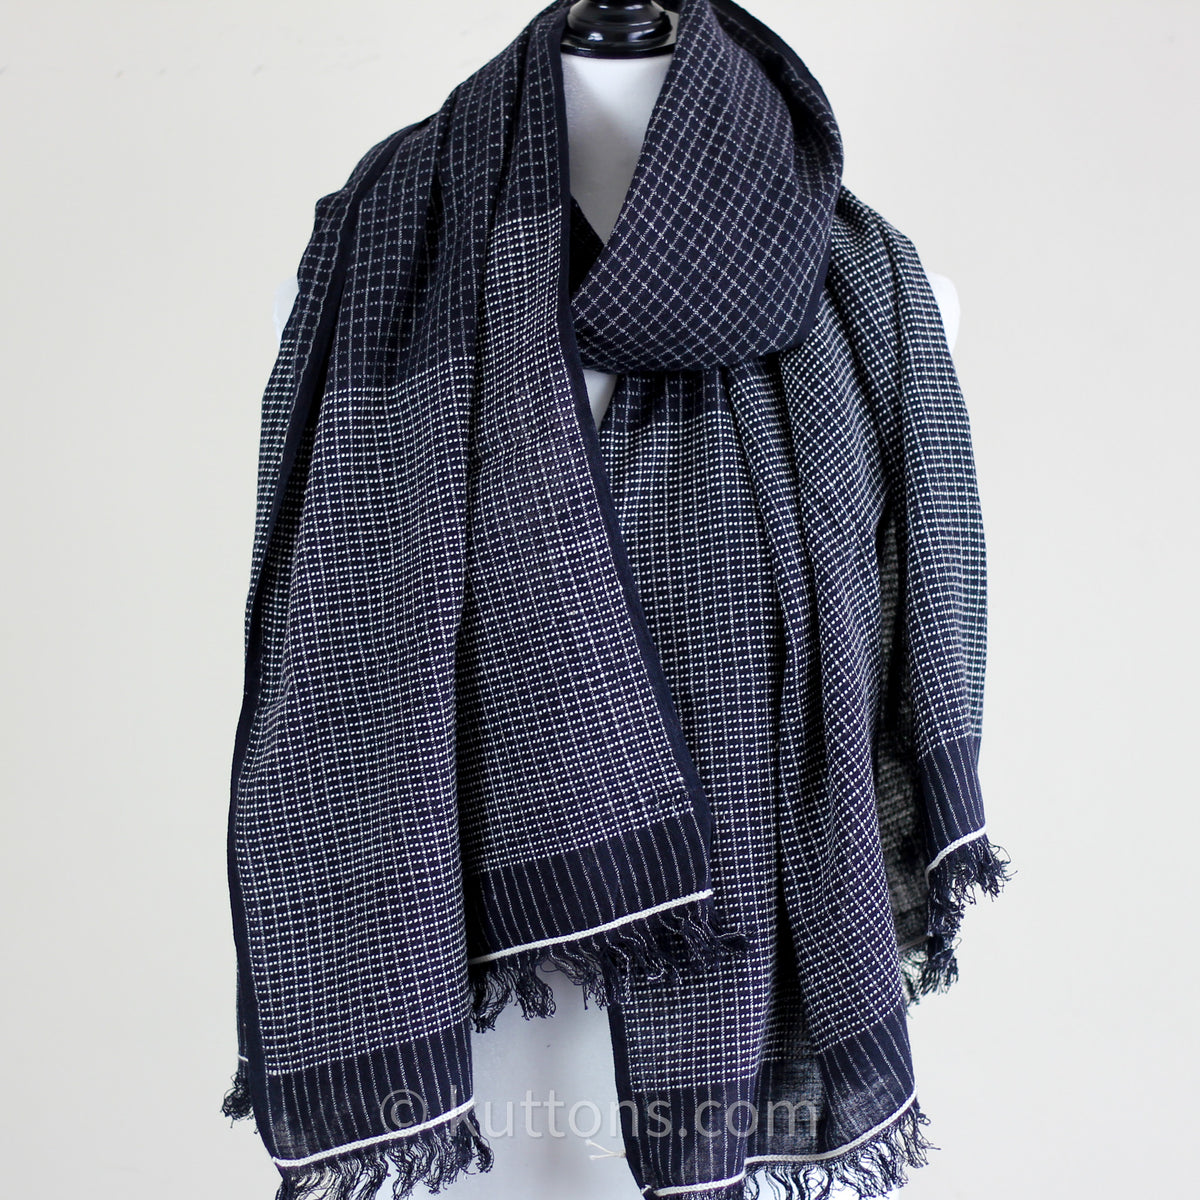 Handspun & Handwoven Cotton Scarf with Frayed Edges - Azo-Free Dyes - Black Stole